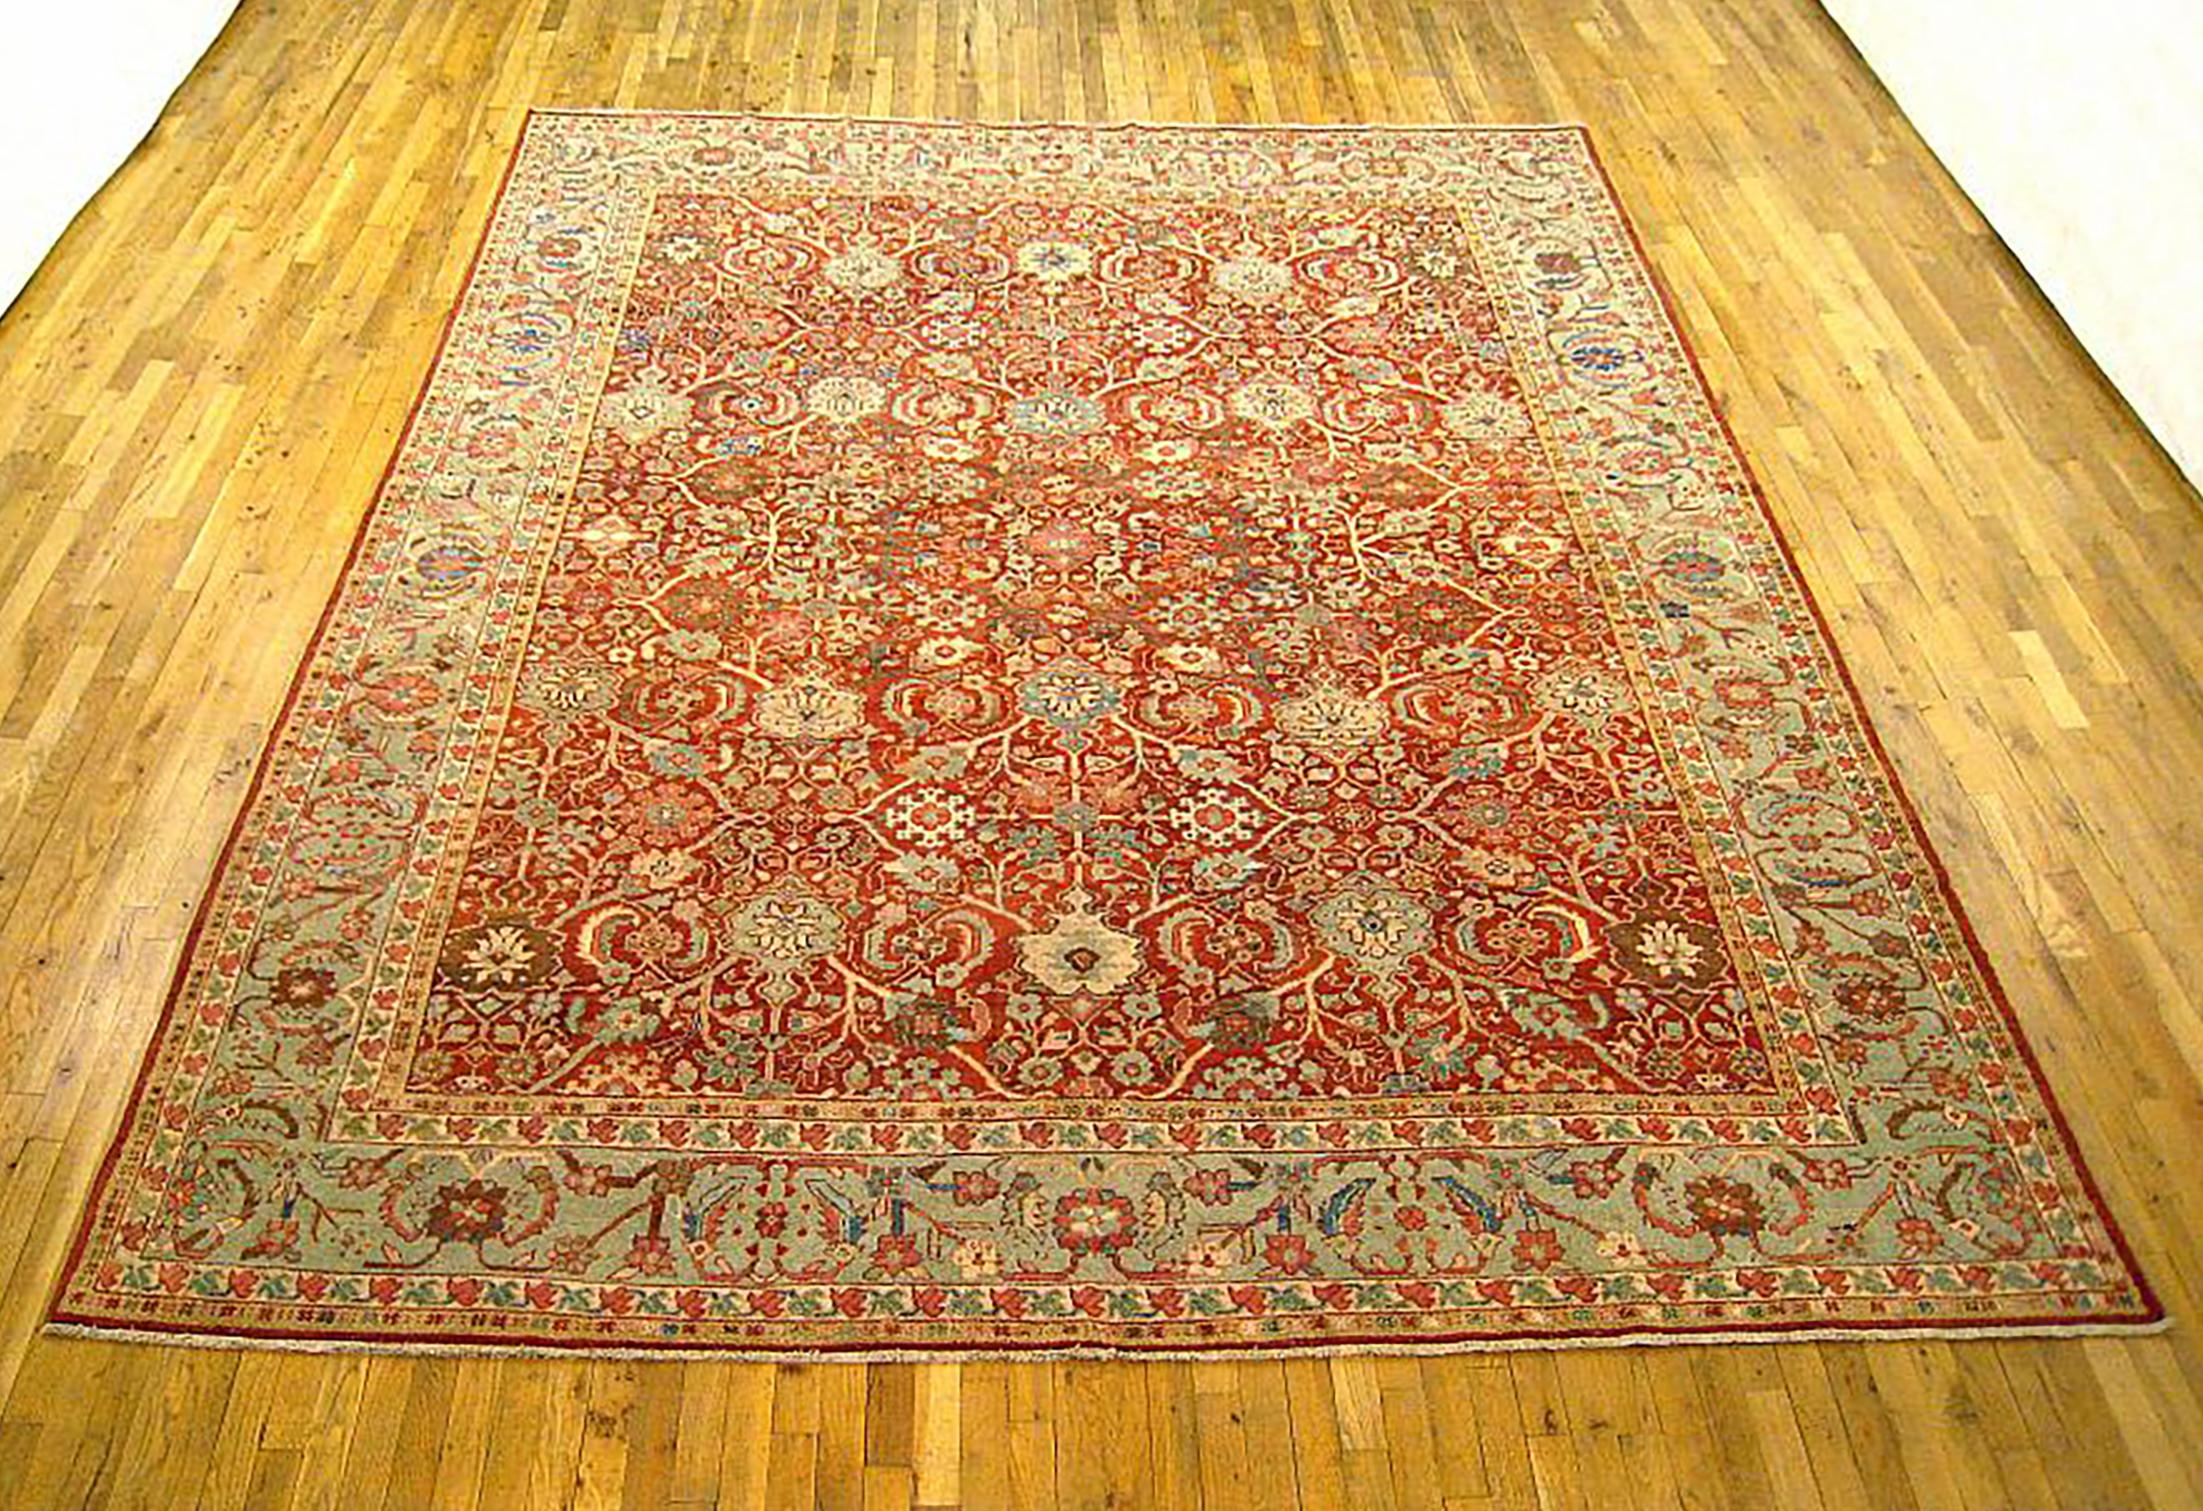 Antique Persian Sultanabad Rug, Room size, circa 1920

A one-of-a-kind antique Persian Sultanabad oriental carpet with a thick and lustrous wool pile, knotted by hand, with soft touch and great resistance to wear. This carpet features floral